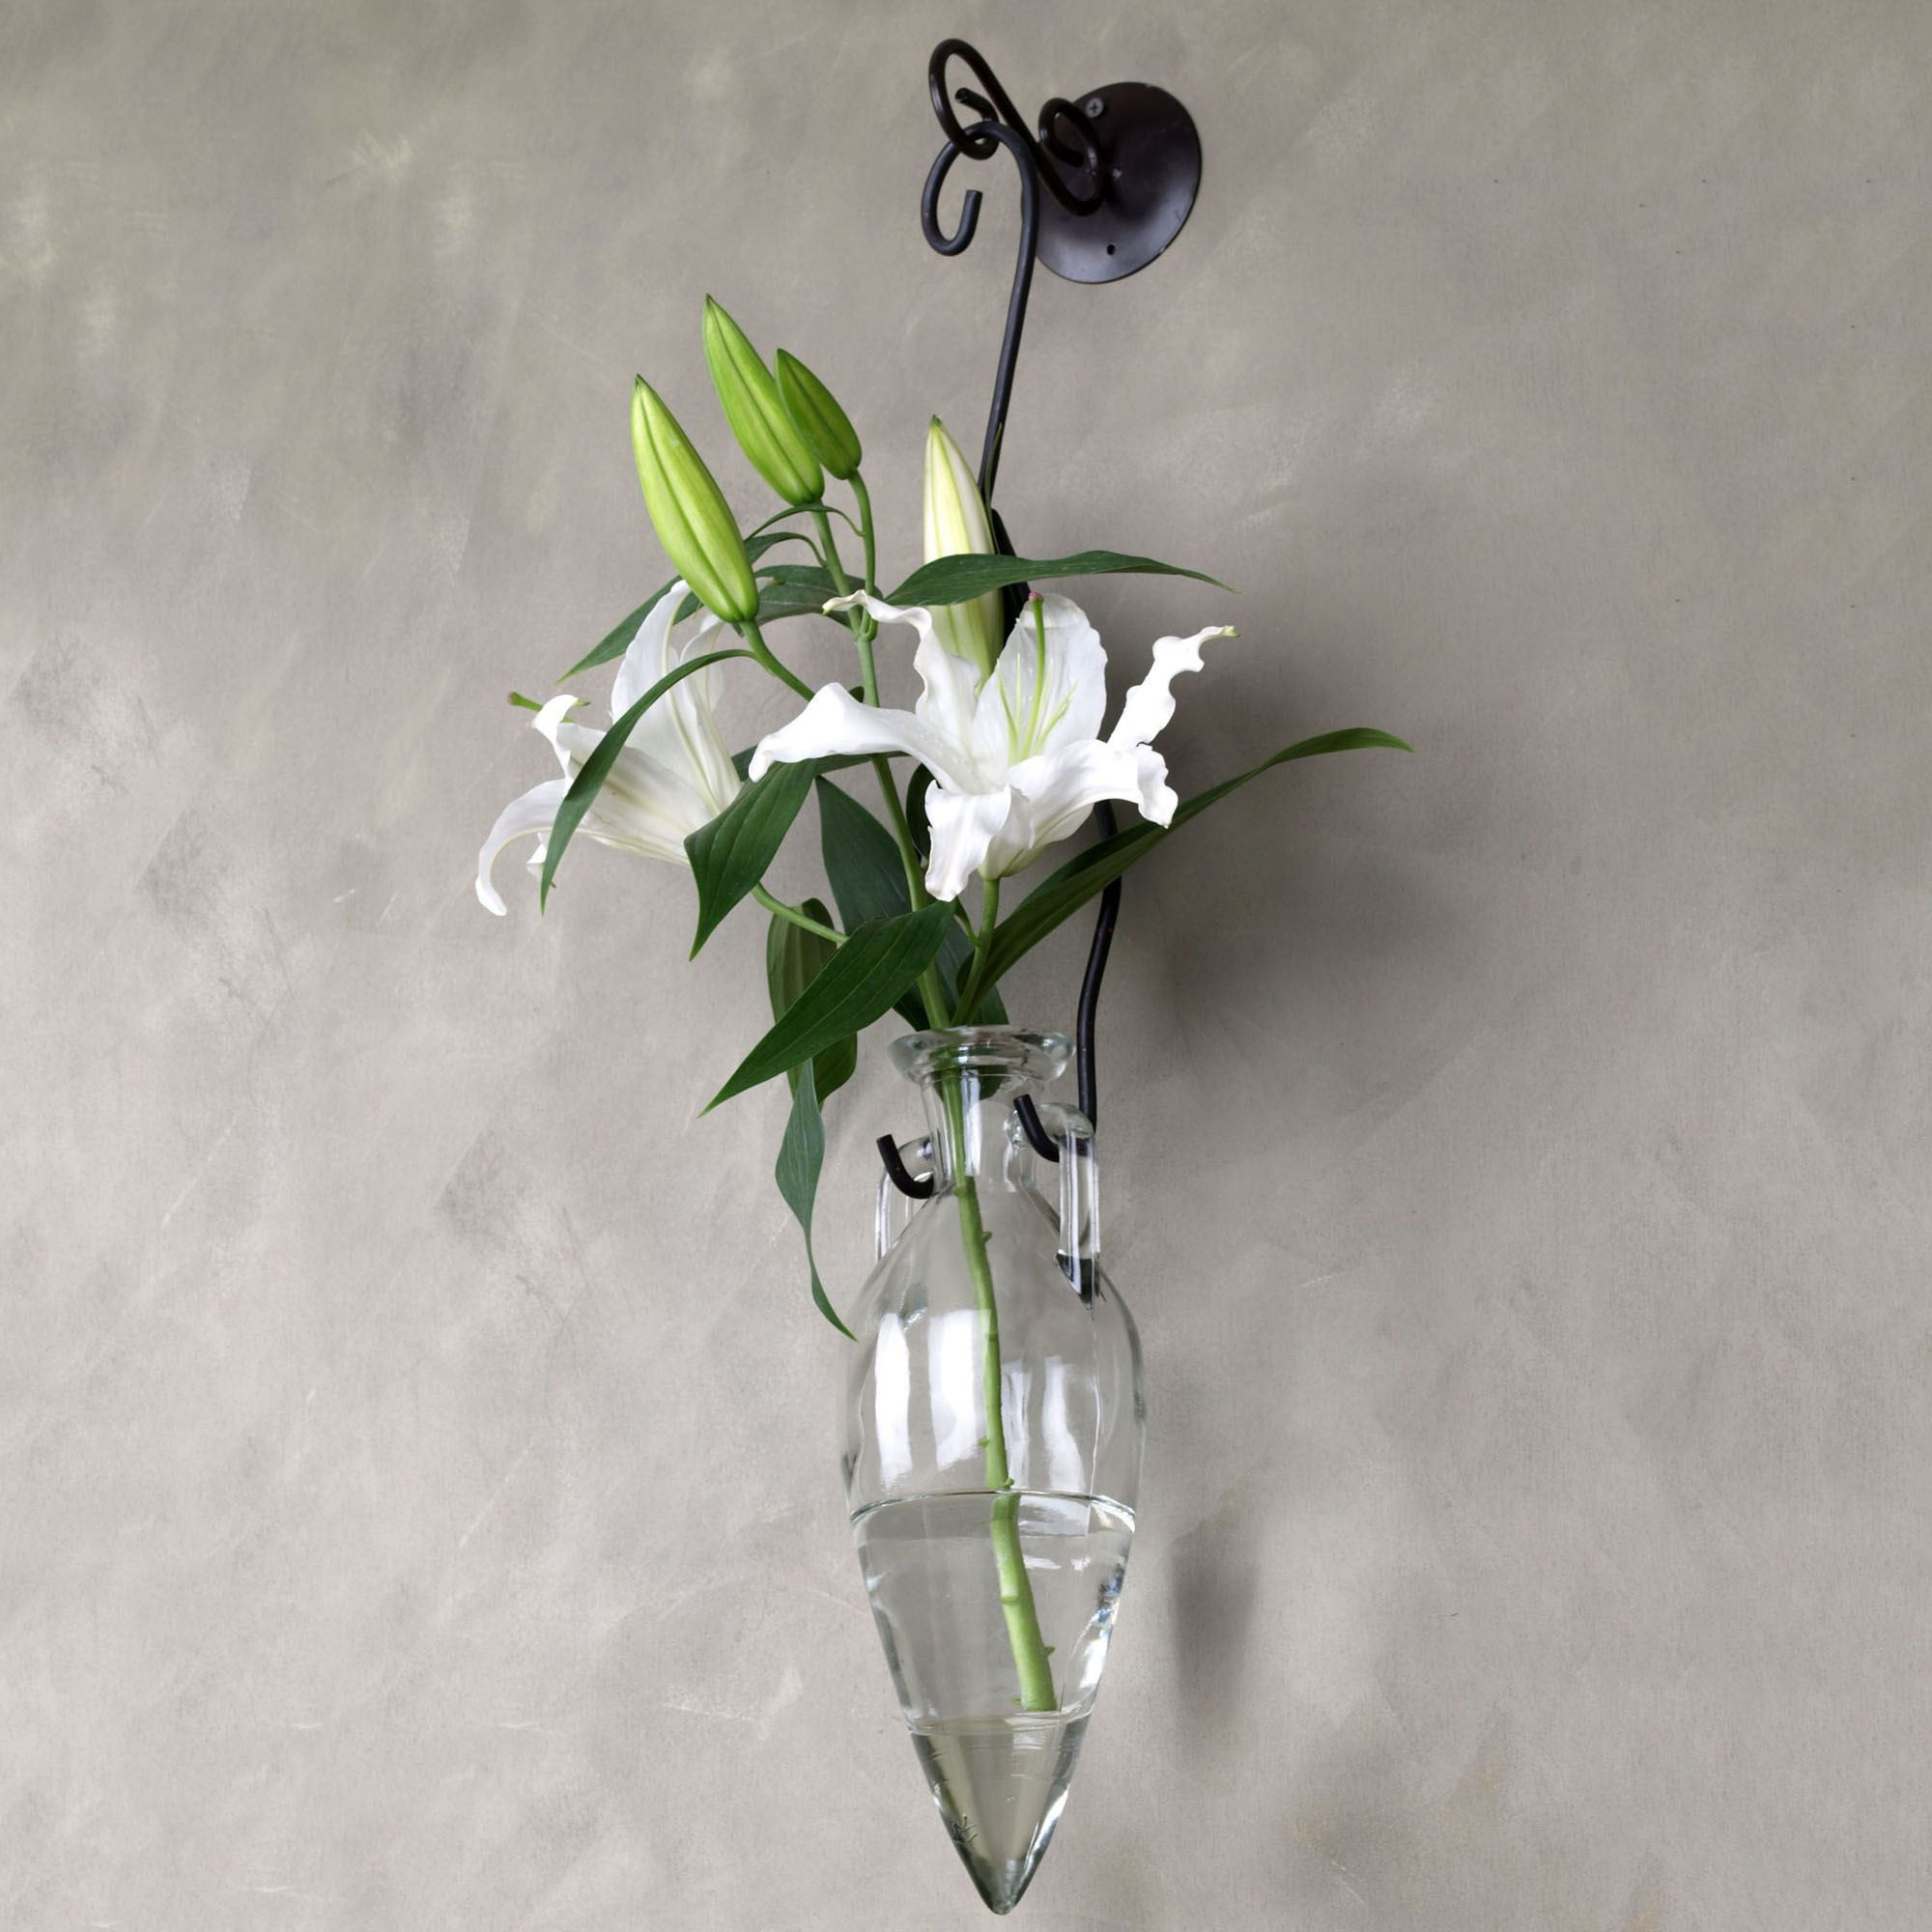 25 Trendy 30 Inch Glass Vases 2024 free download 30 inch glass vases of 30 copper flower vase the weekly world in 33 inspirational silver vase decor